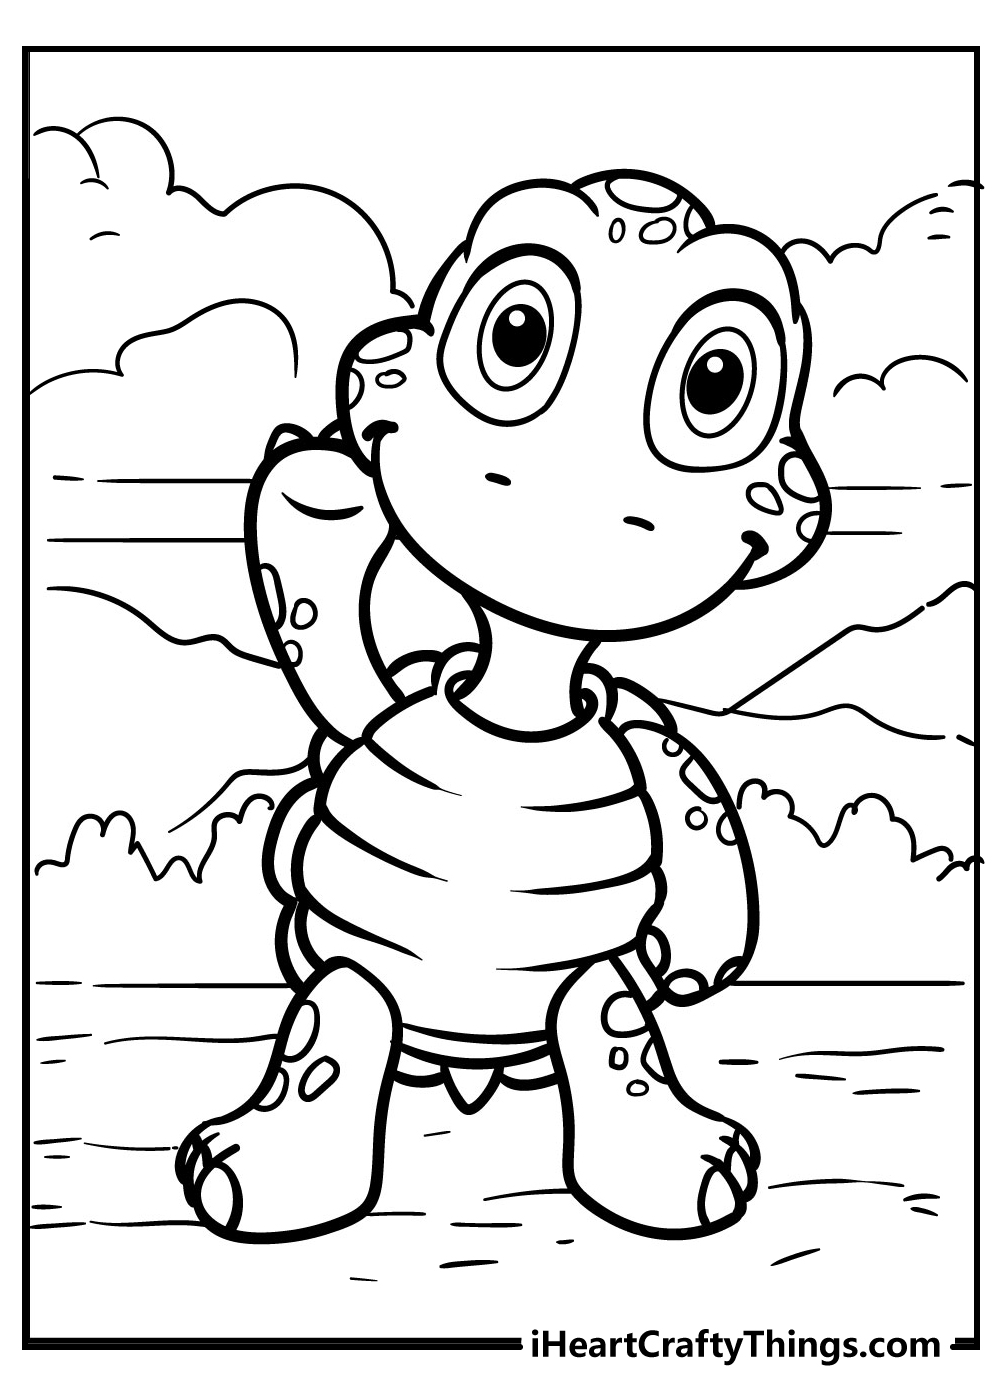 black and white baby turtle coloring book for kids free print